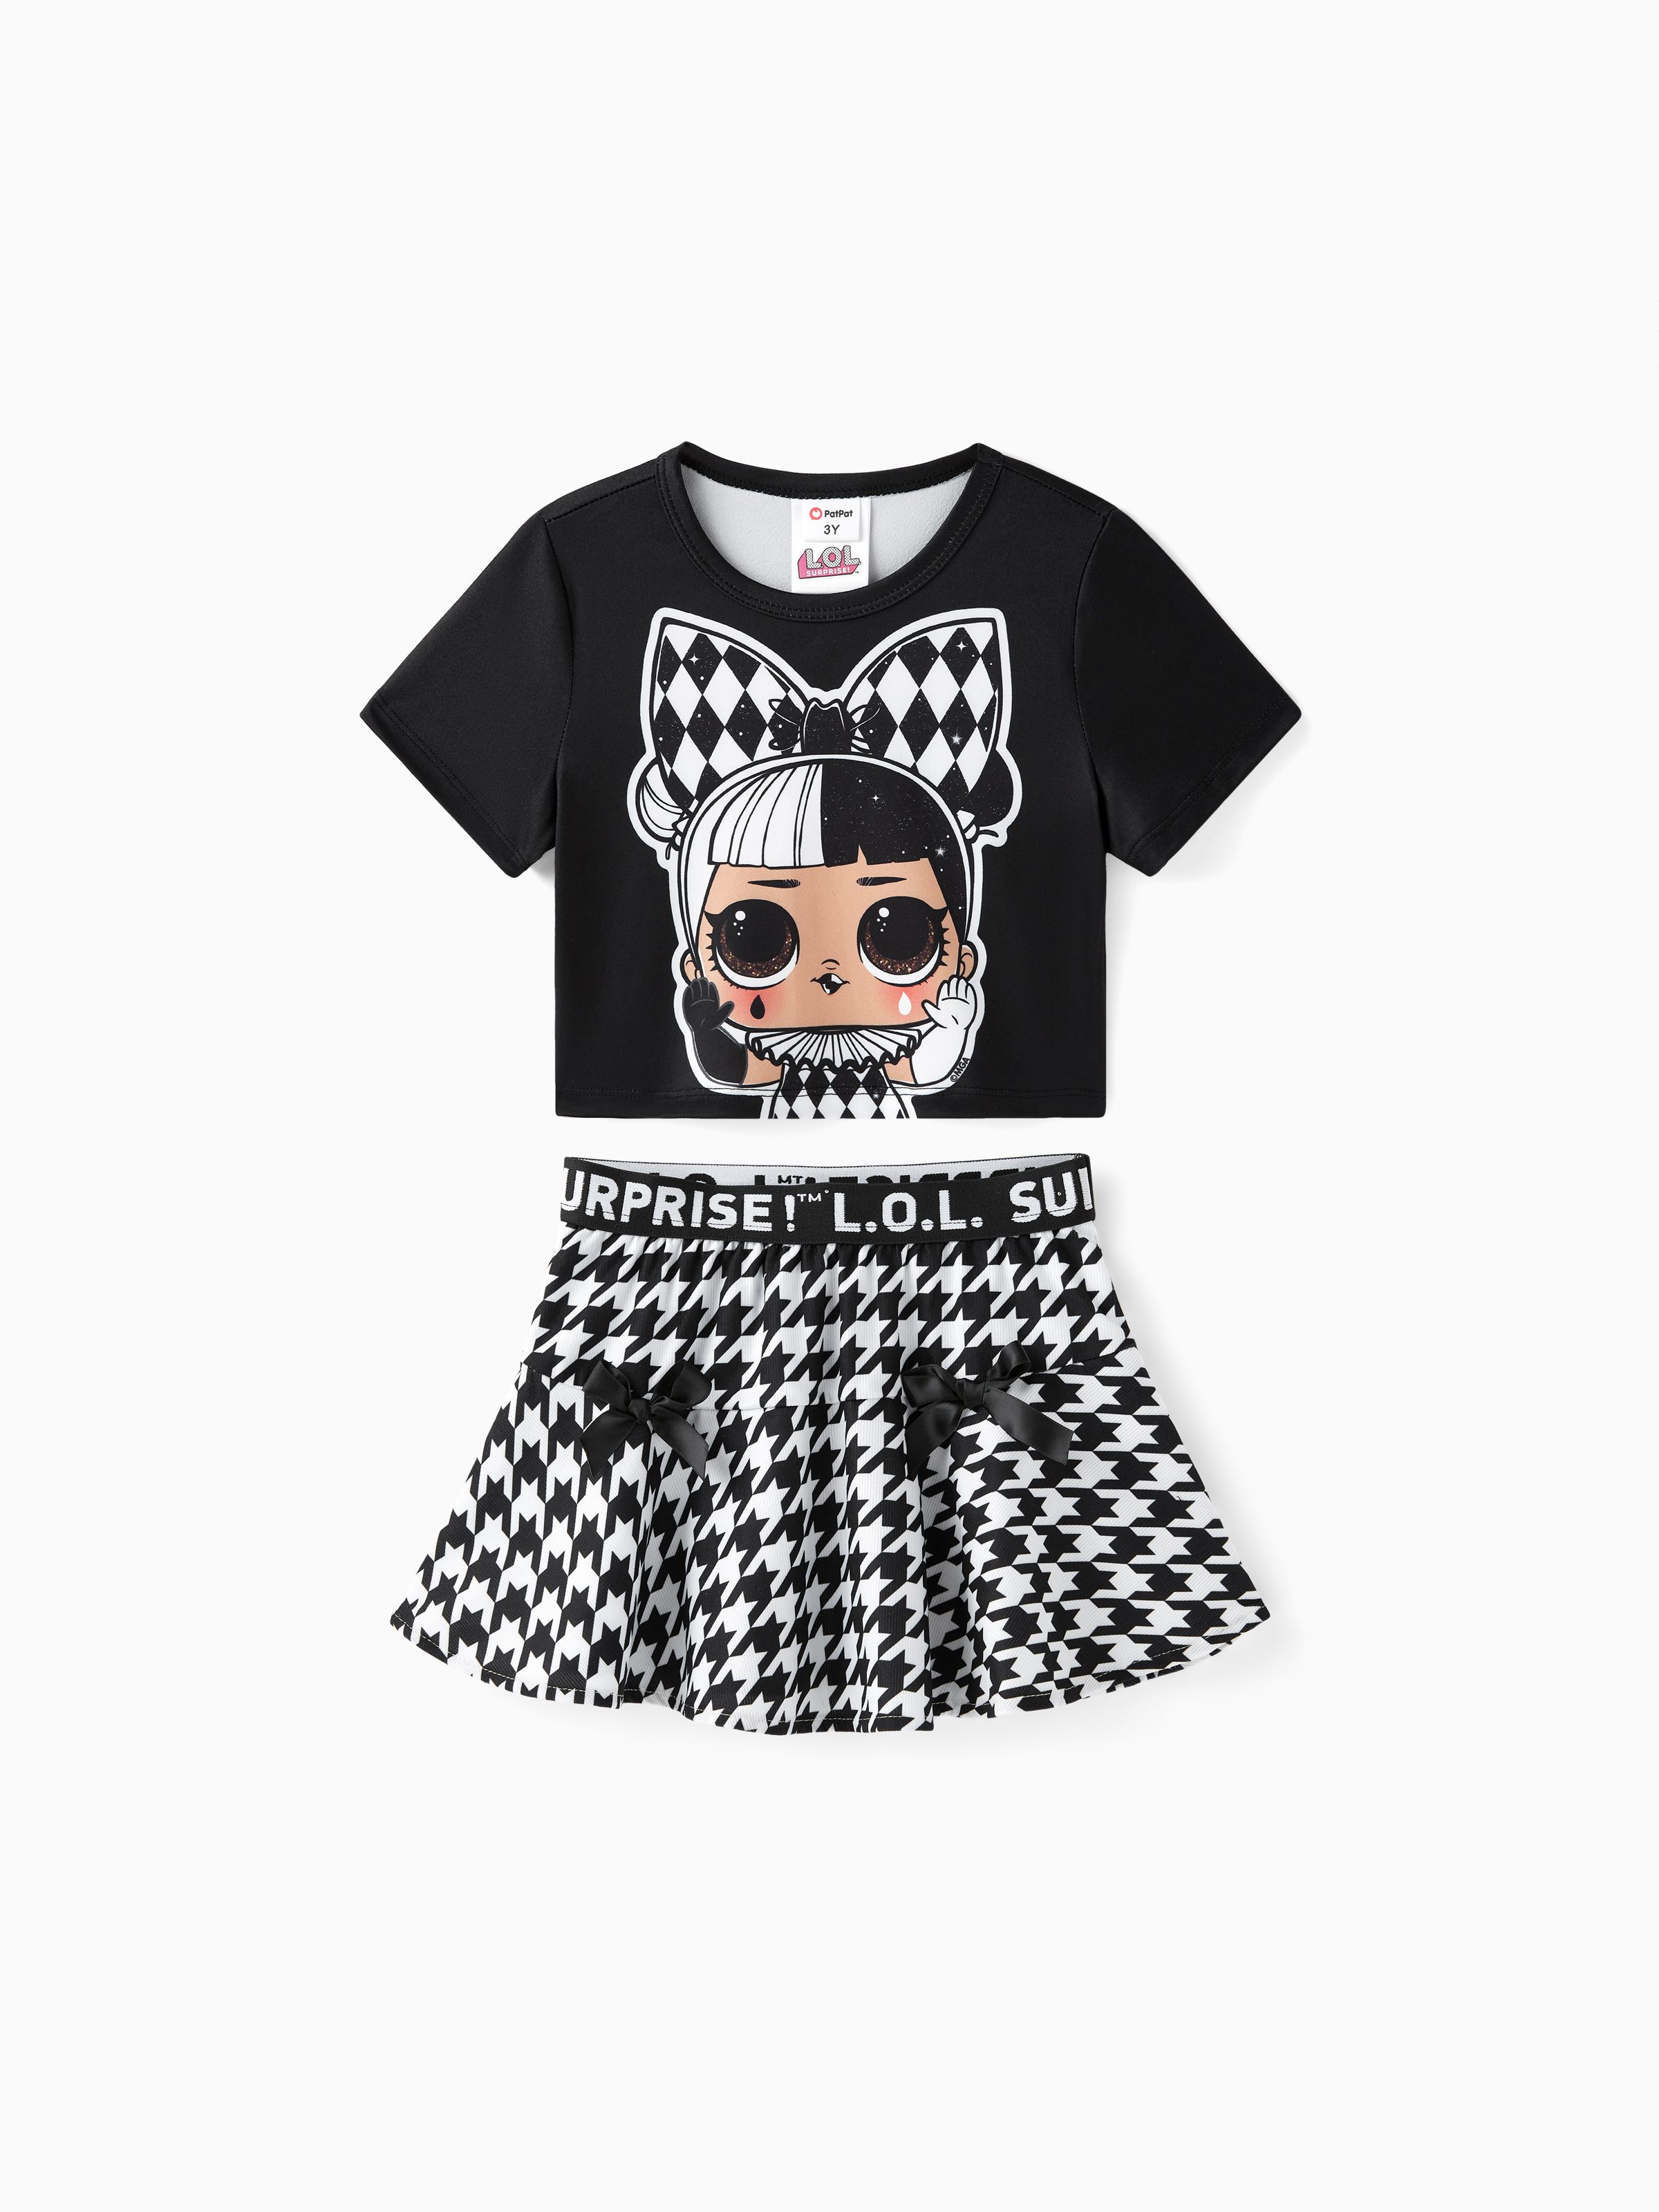 

L.O.L. SURPRISE! Toddler Girl/Kid Girl Graphic Print Short-sleeve Tee and Skirt